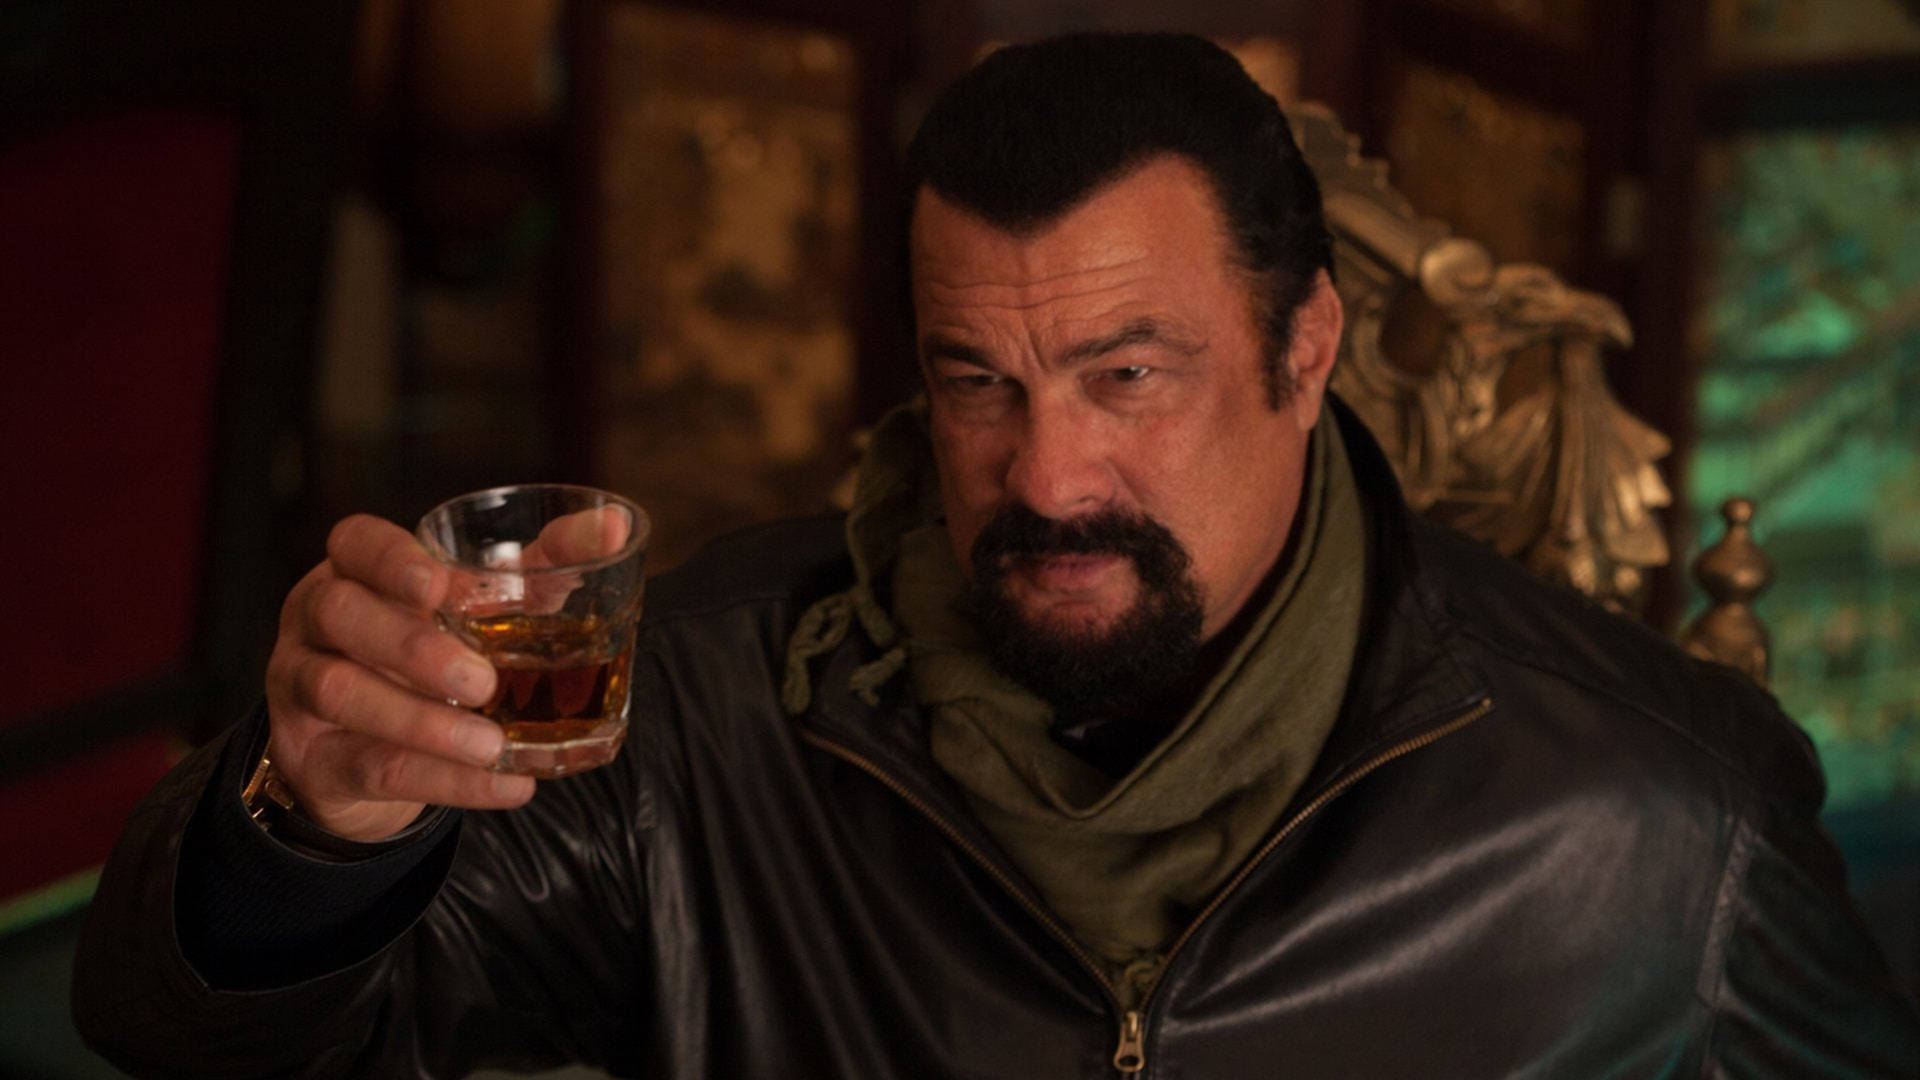 Stevenseagal, En God Man. (this Could Be A Possible Translation For A Computer Or Mobile Wallpaper With This Phrase.) Wallpaper